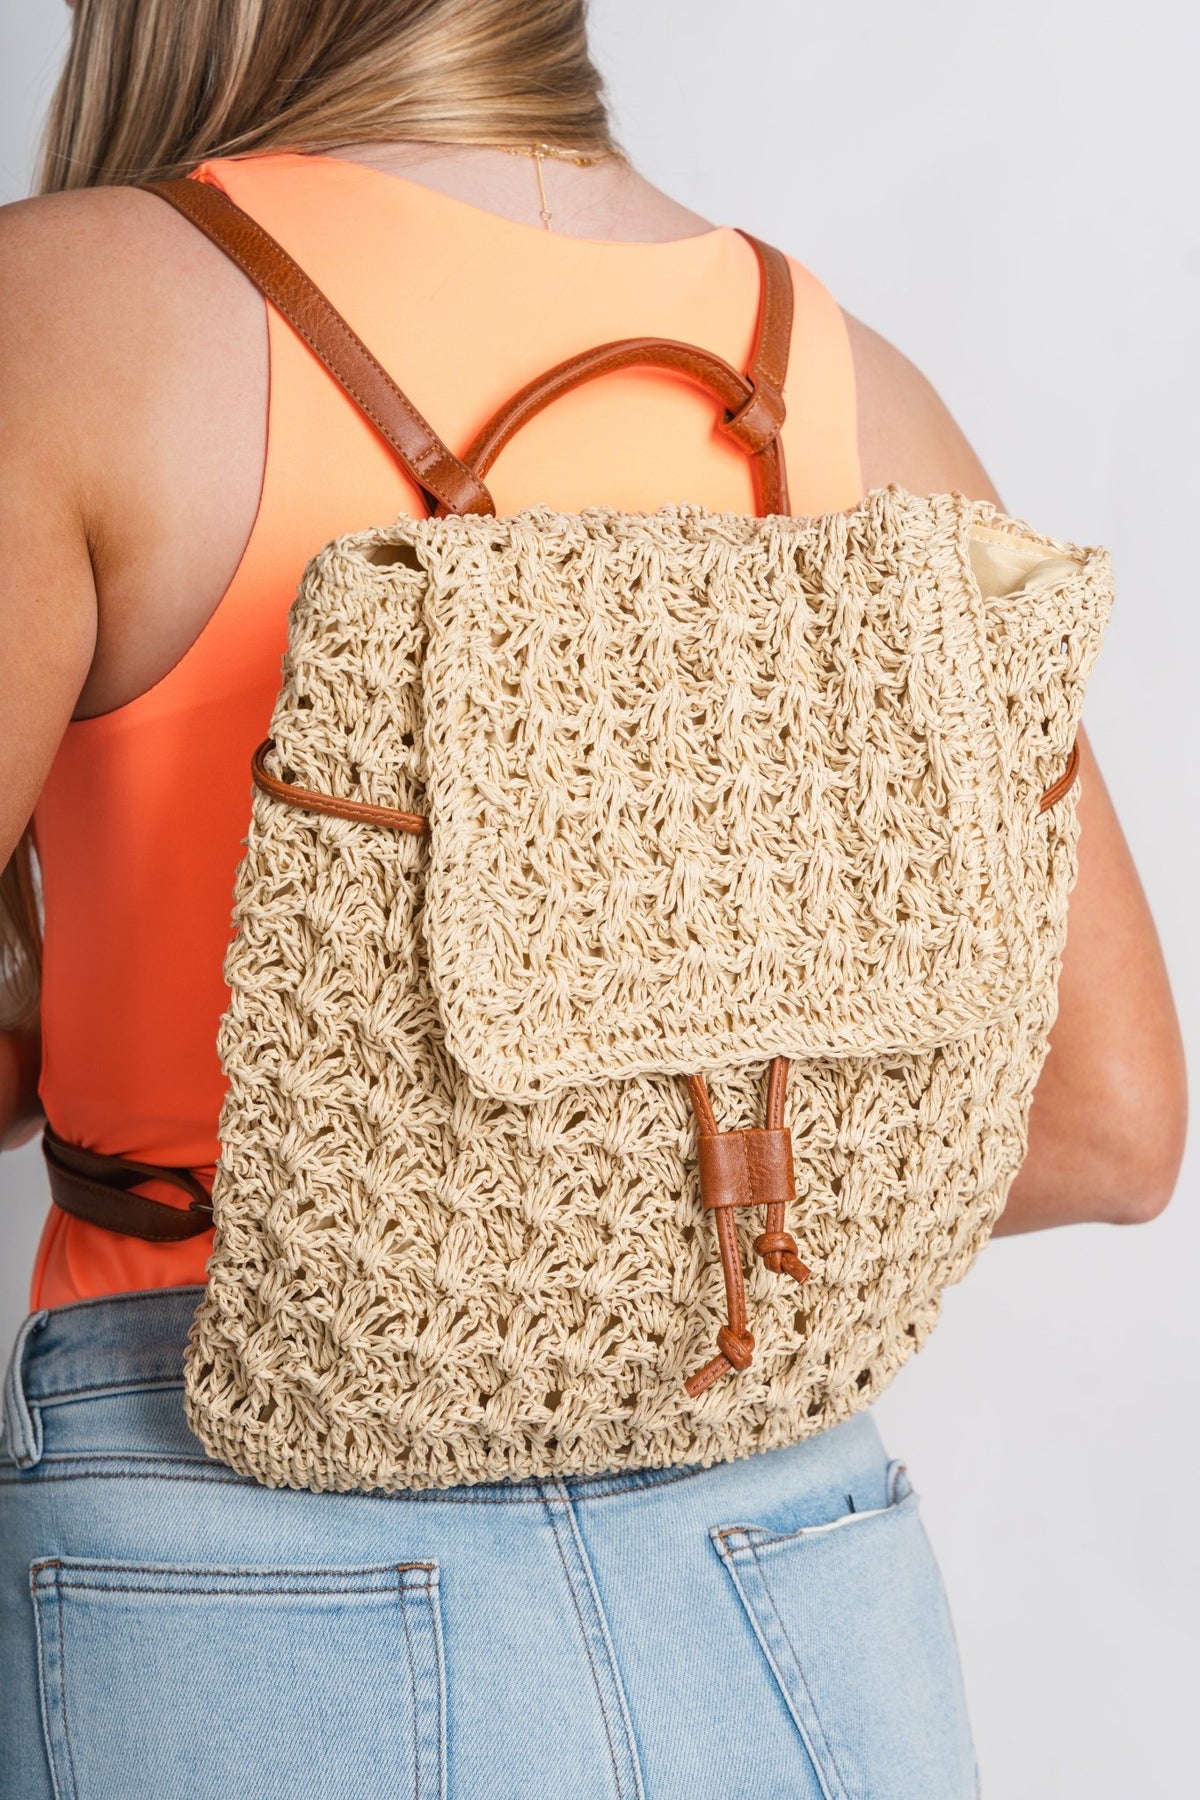 Straw backpack natural - Trendy backpack - Cute Vacation Collection at Lush Fashion Lounge Boutique in Oklahoma City